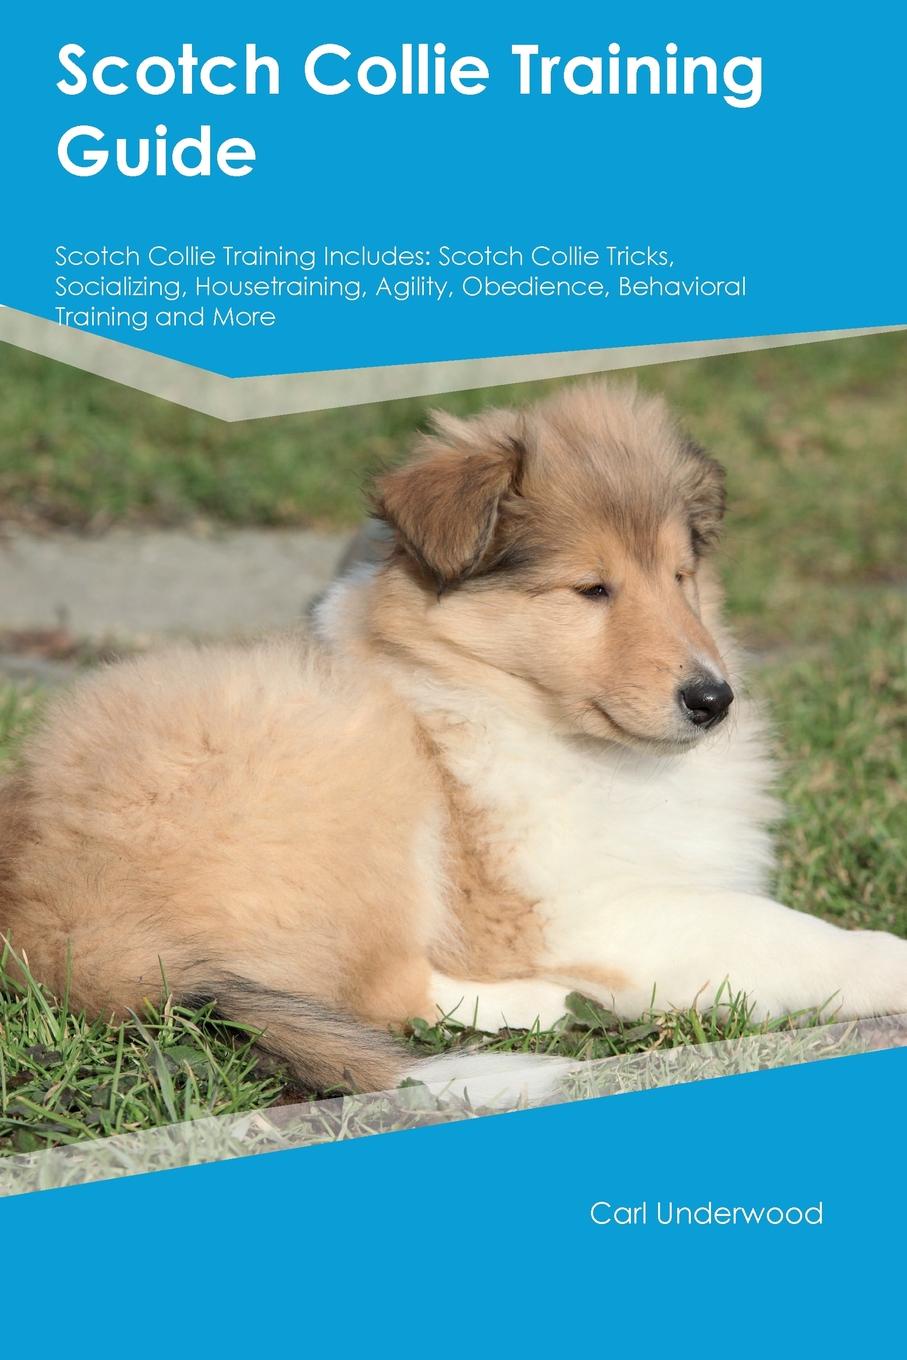 Scotch Collie Training Guide Scotch Collie Training Includes. Scotch Collie Tricks, Socializing, Housetraining, Agility, Obedience, Behavioral Training and More